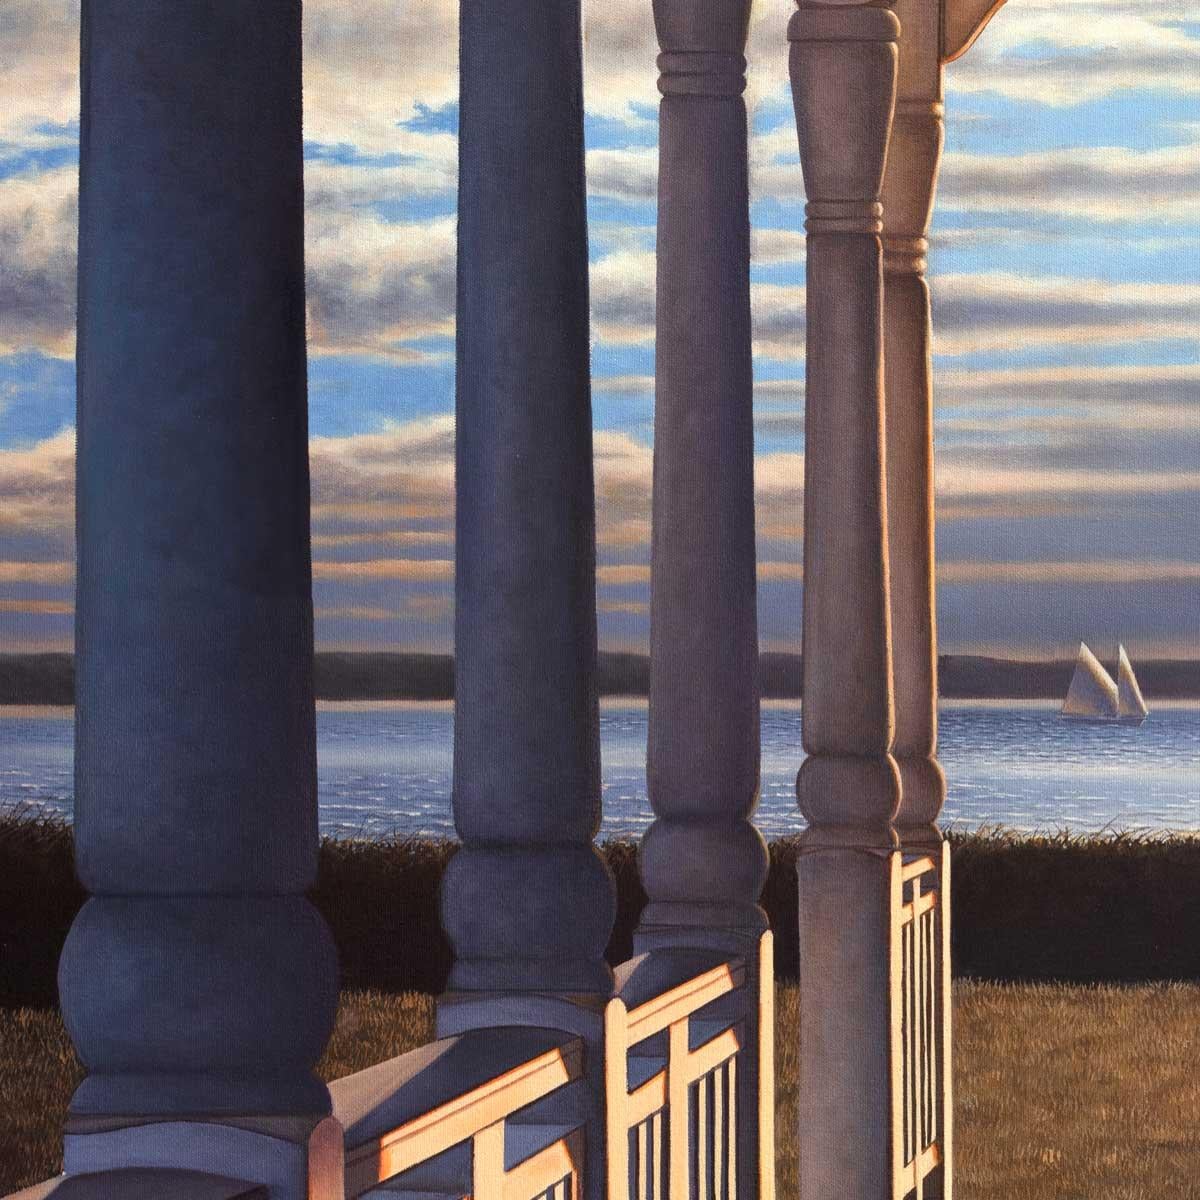 This contemporary realist Limited Edition print by Daniel Pollera is rendered from the perspective of a view from a beach house porch, looking out toward a body of water. Two Adirondack chairs are positioned on the grass between the edge of the